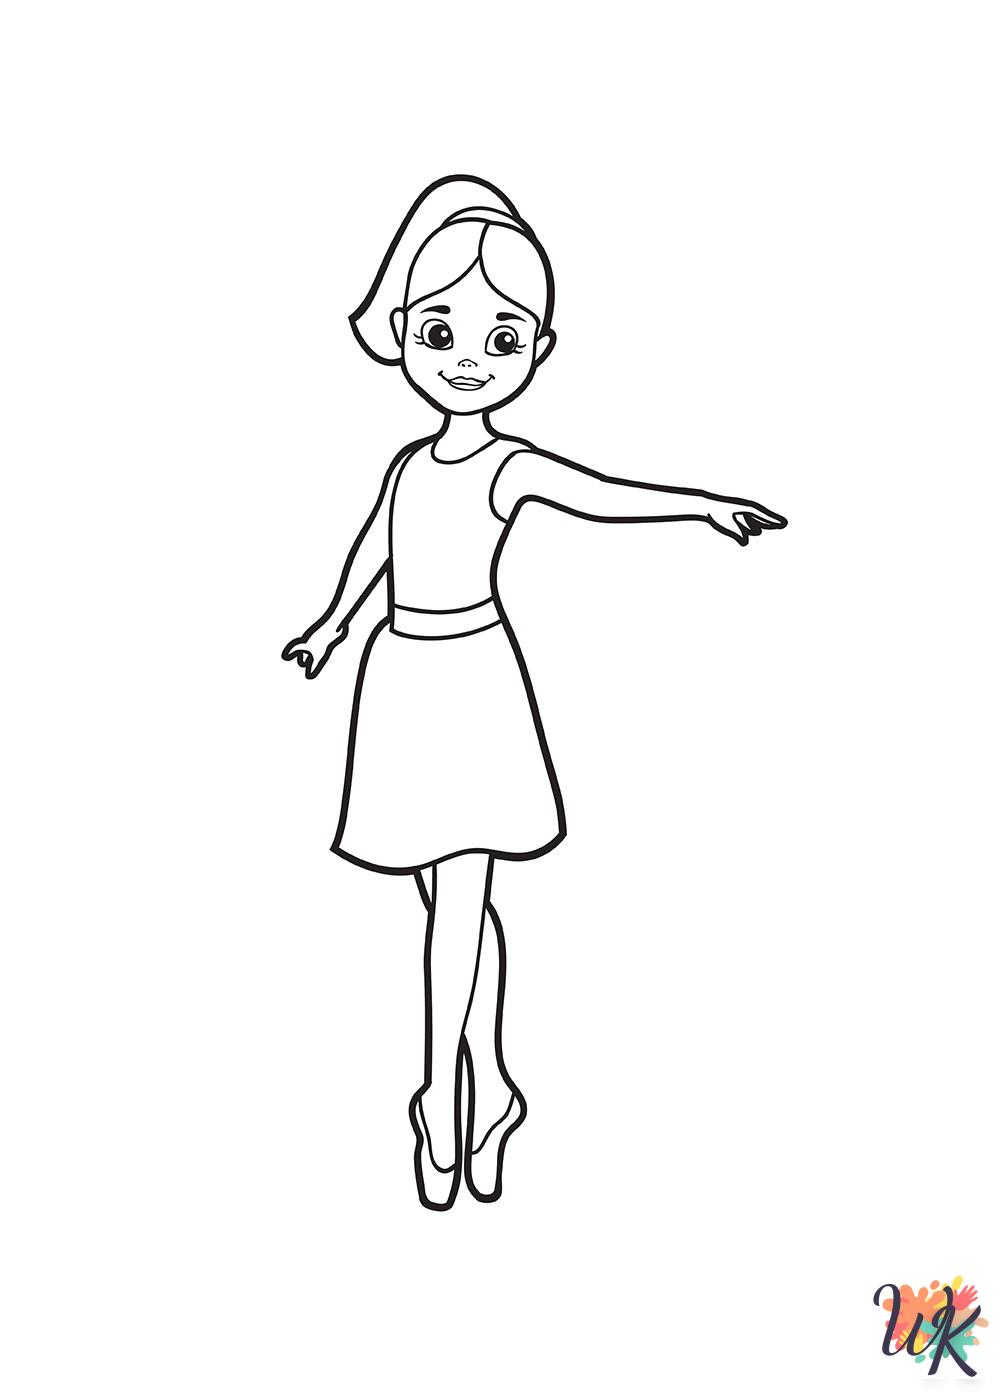 Ballerina coloring pages to print